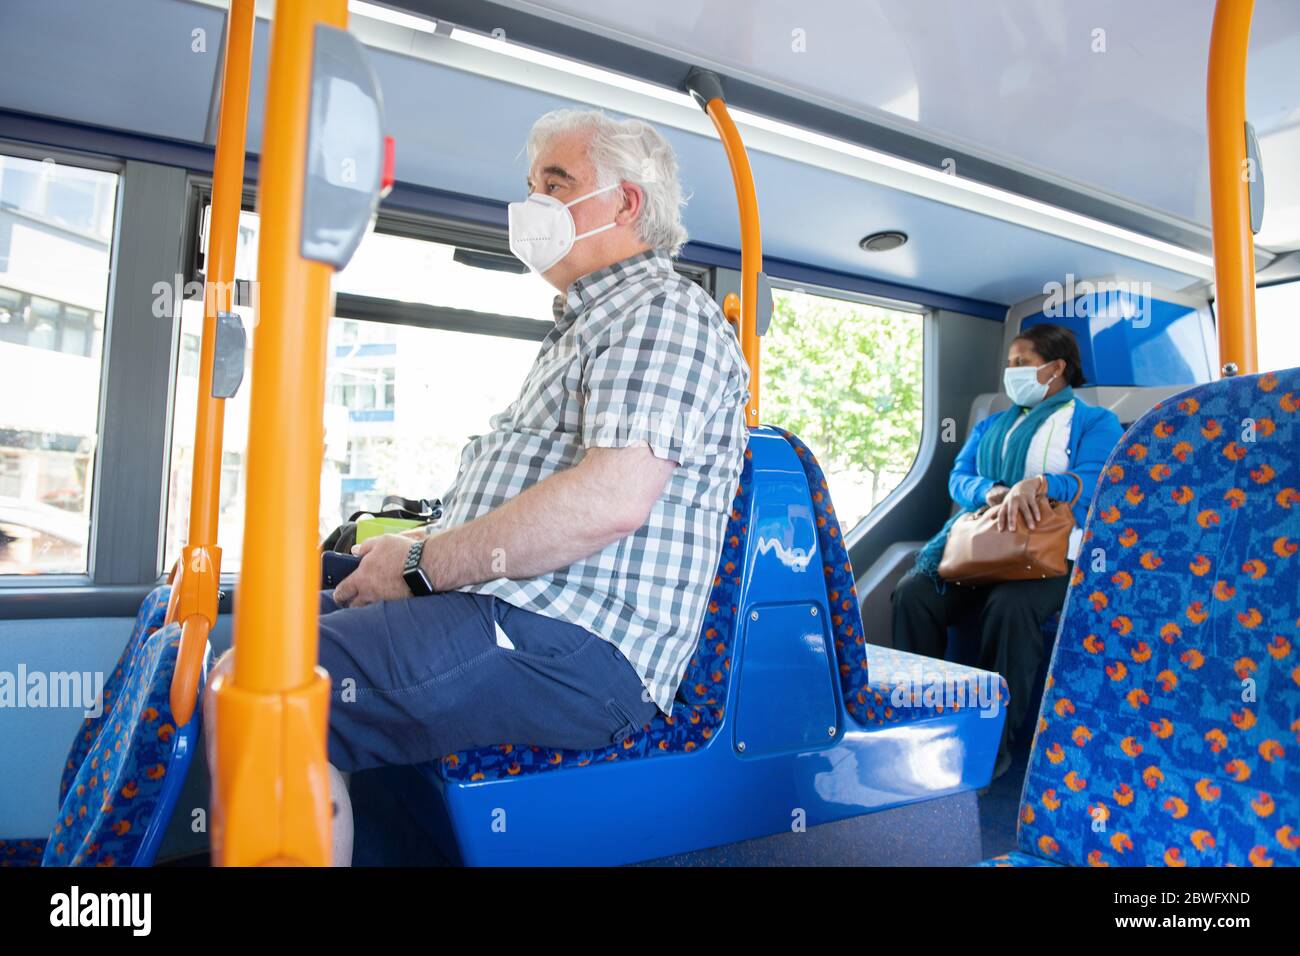 New stickers on buses remind commuters to socially distance during the COVID-19 pandemic.  Double decker bus route 53, Old Kent Road.  May 30, 2020. Stock Photo